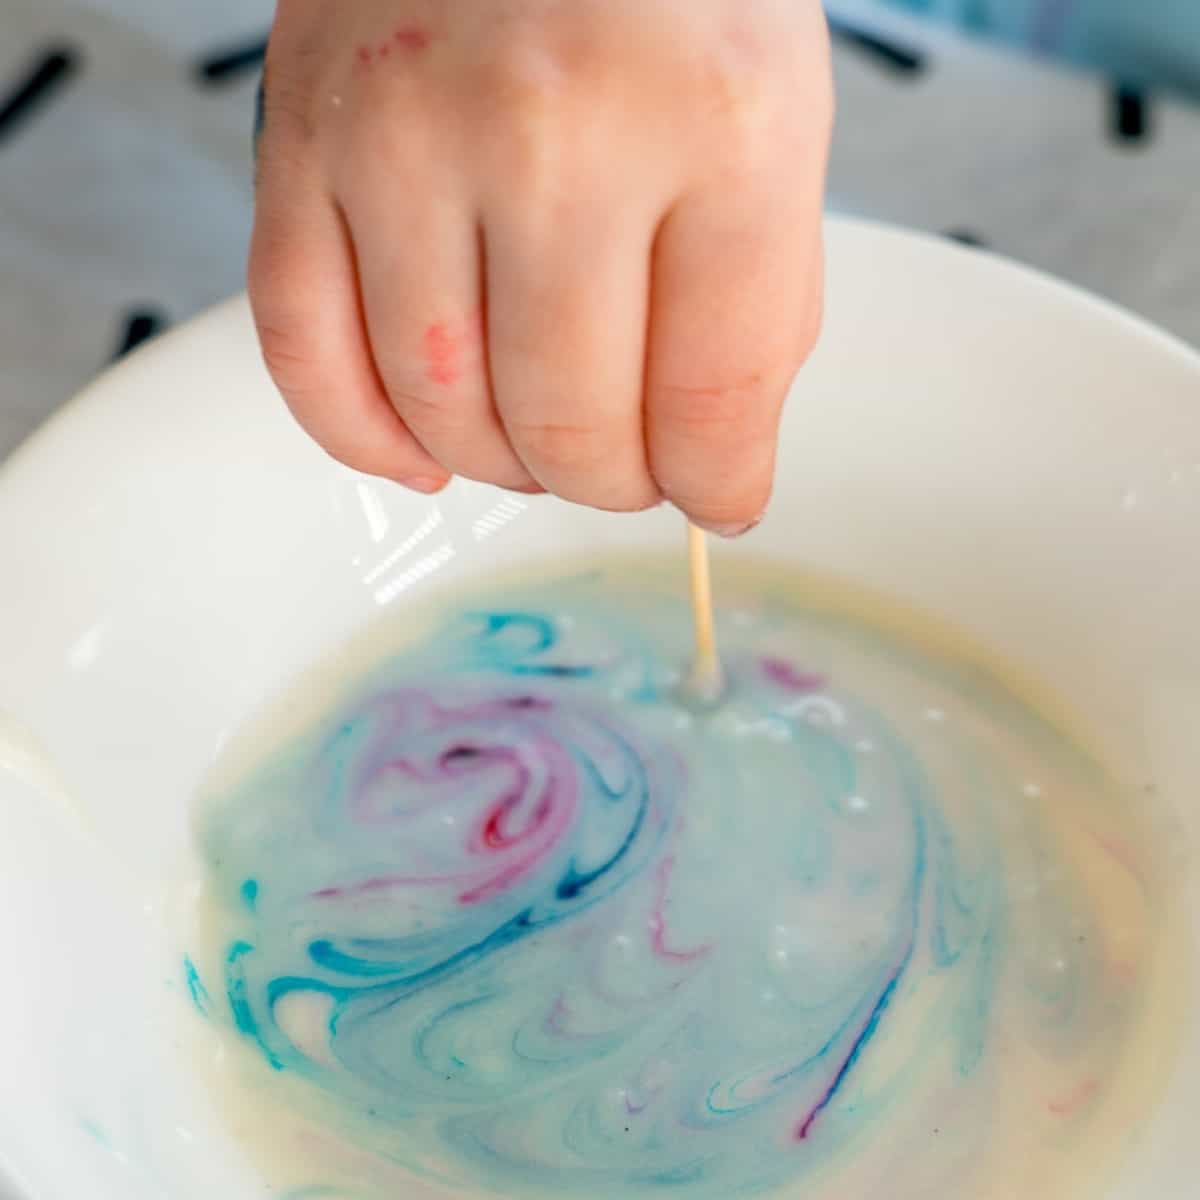 A child's hand swirling food colouring through cookie glaze using a tooth pick.